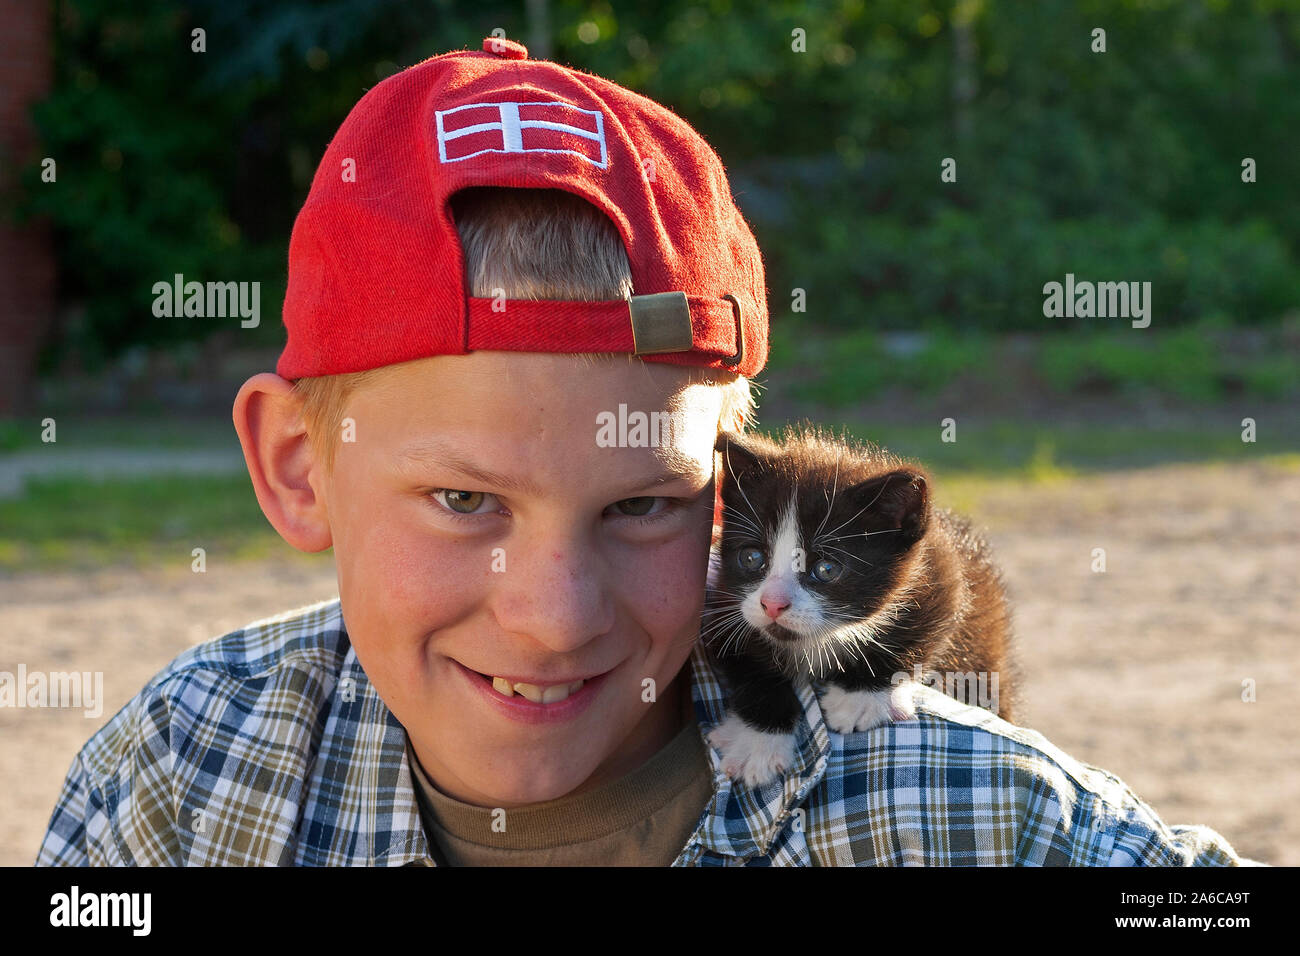 Portrait of a young boy with a kitten. Stock Photo